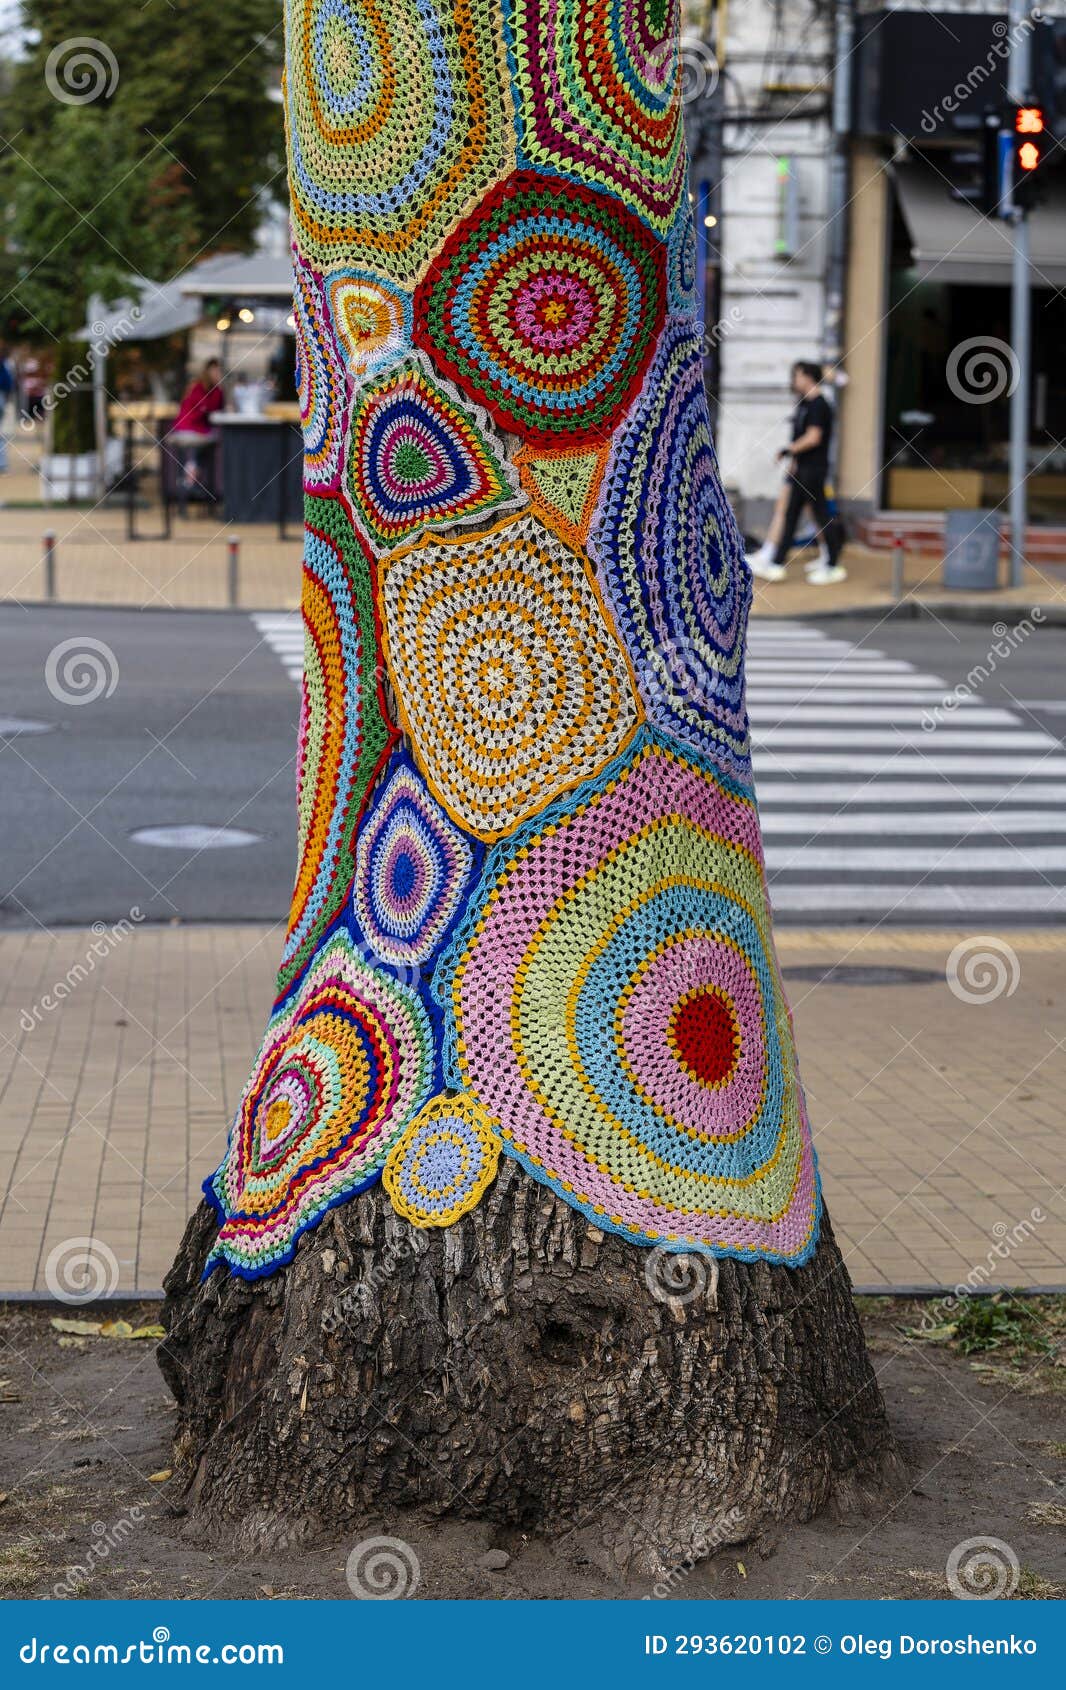 Colorful Crochet Knit on Tree Trunk in Kyiv, Ukraine. Street Art Goes by  Different Names, Graffiti Knitting, Yarn Bombing. Stock Photo - Image of  ecologic, crafts: 293620102